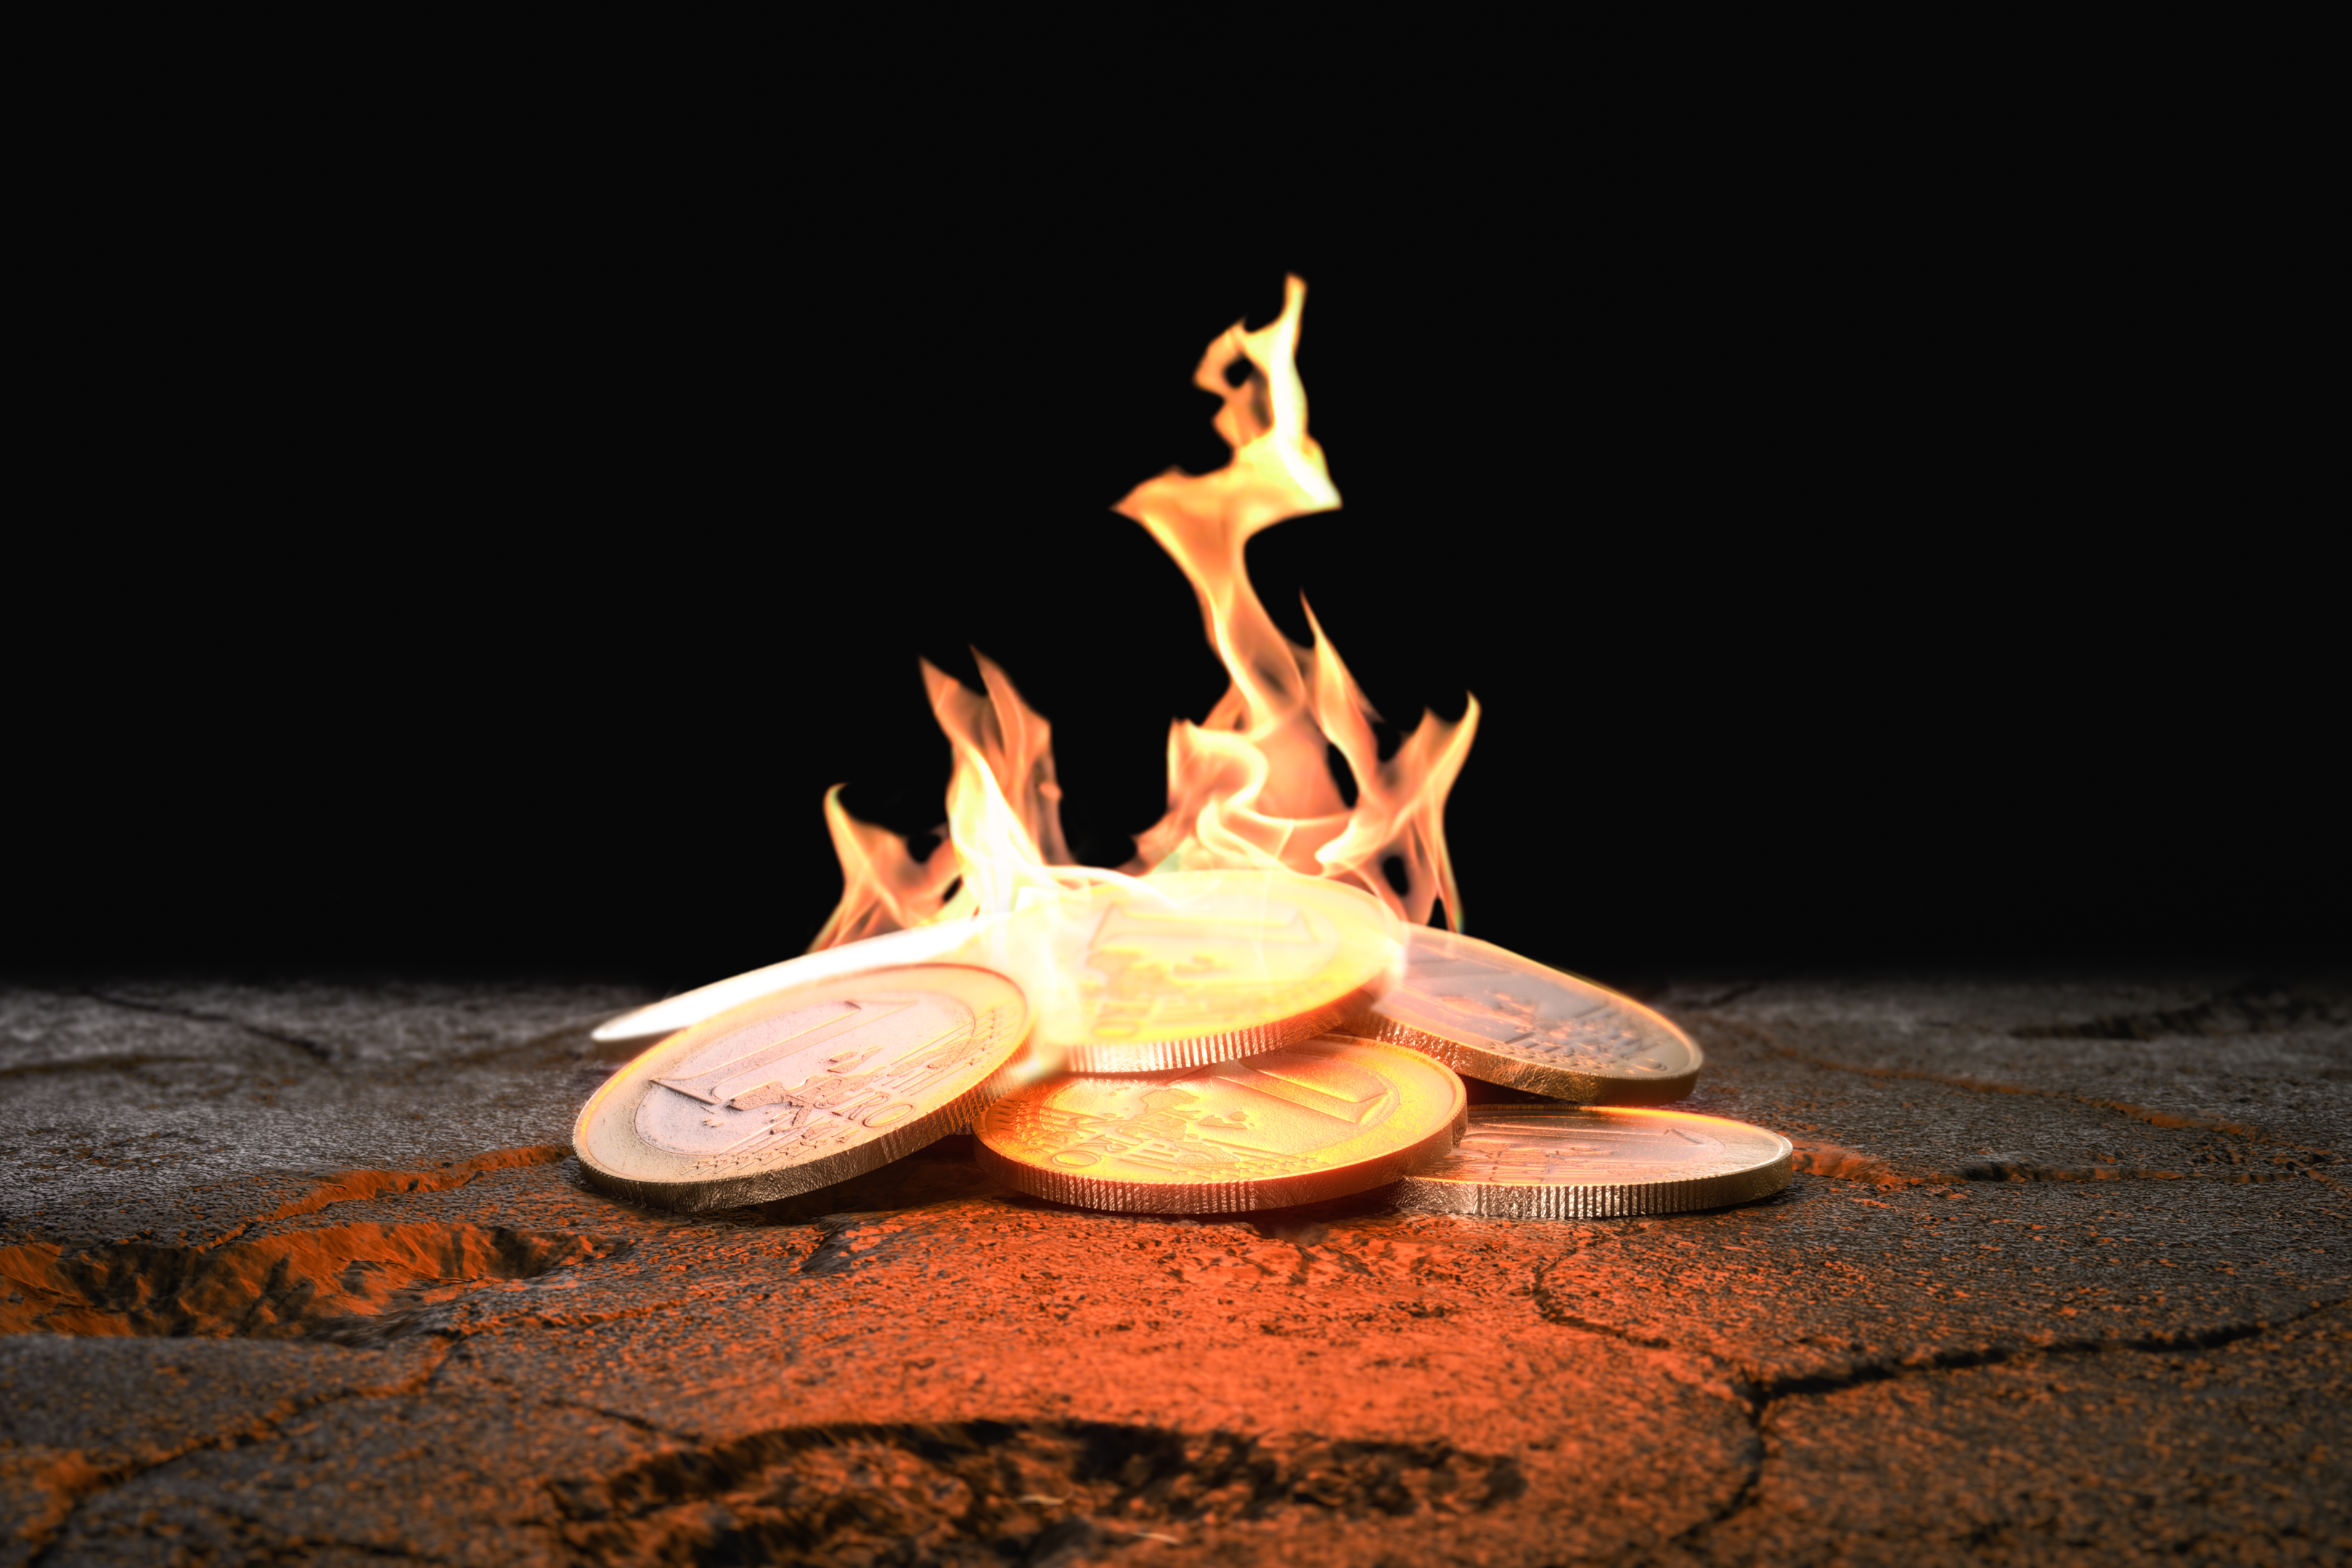 "Fiery coins on fractured terrain: a stark image of monetary damages impacting economies."